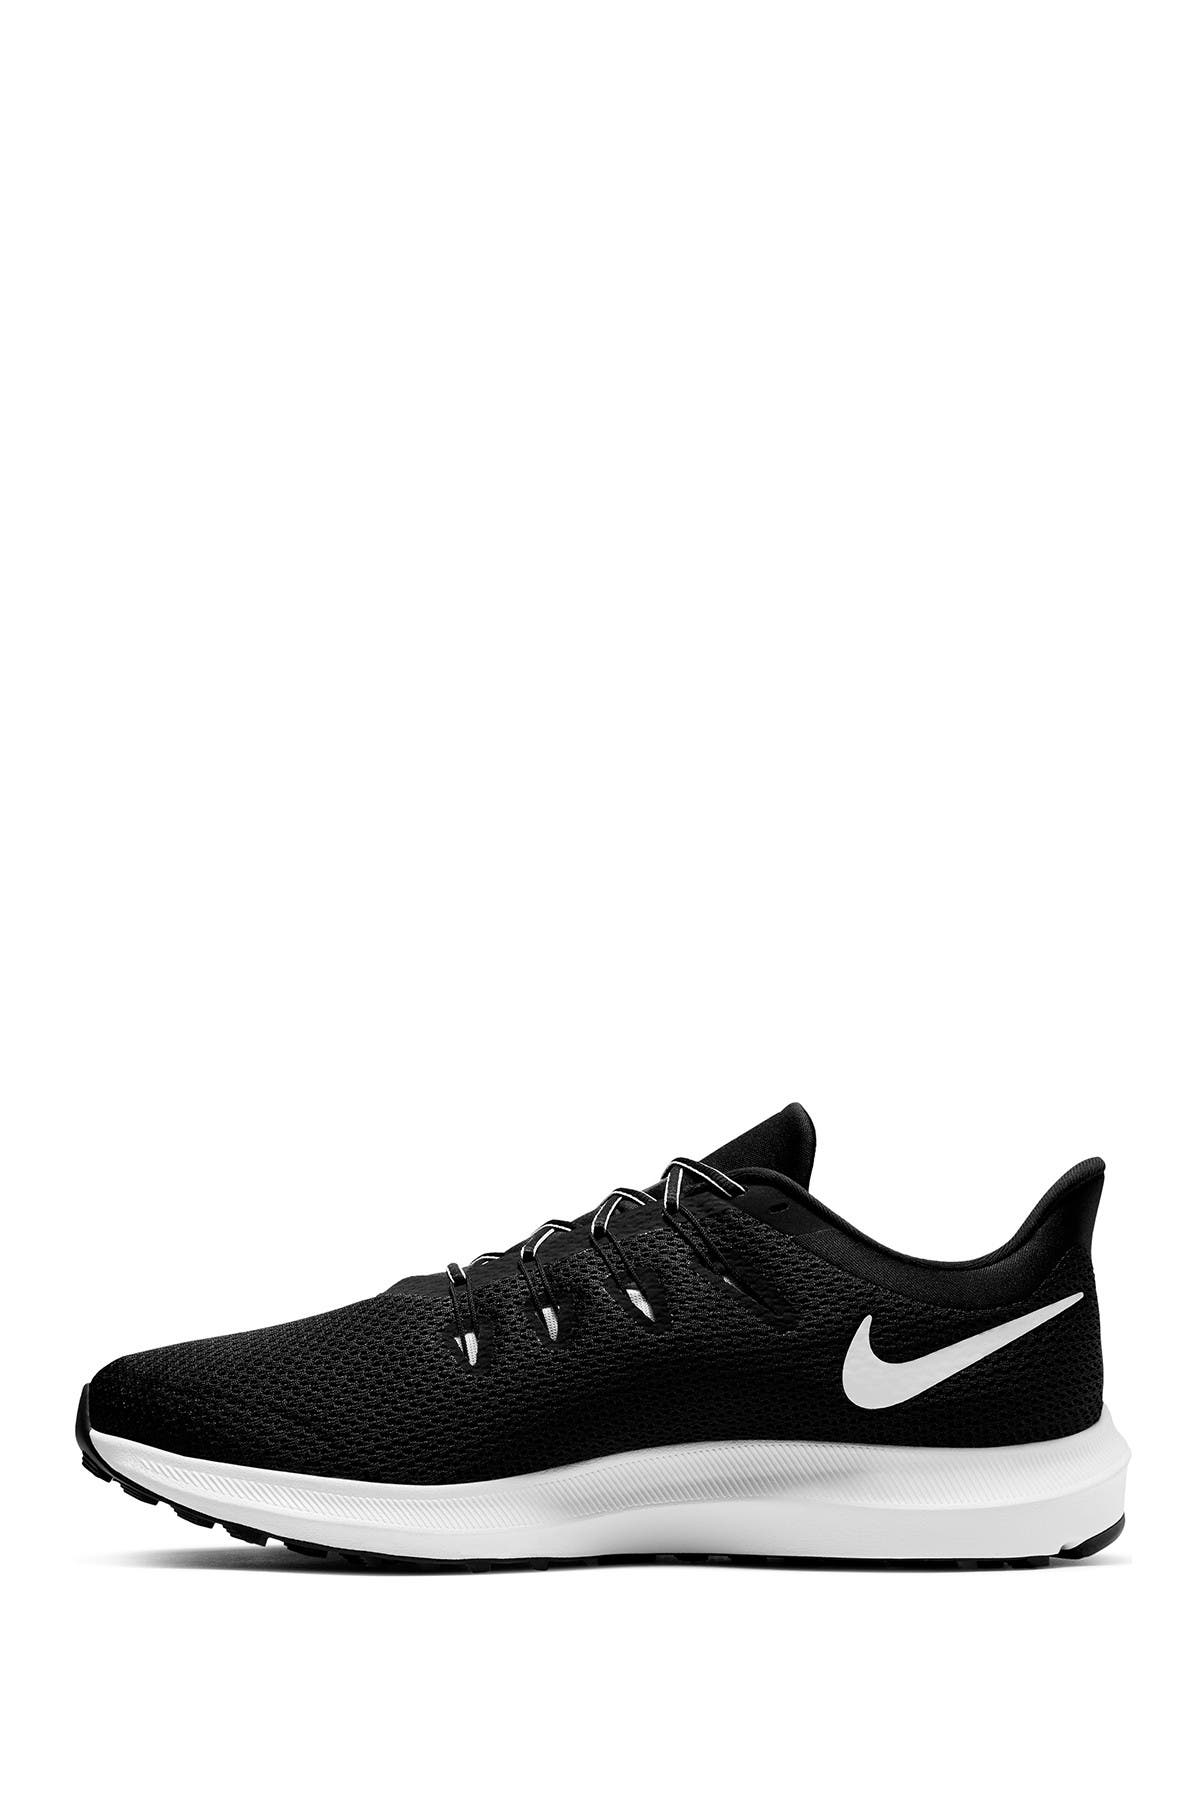 nike quest 2 wide